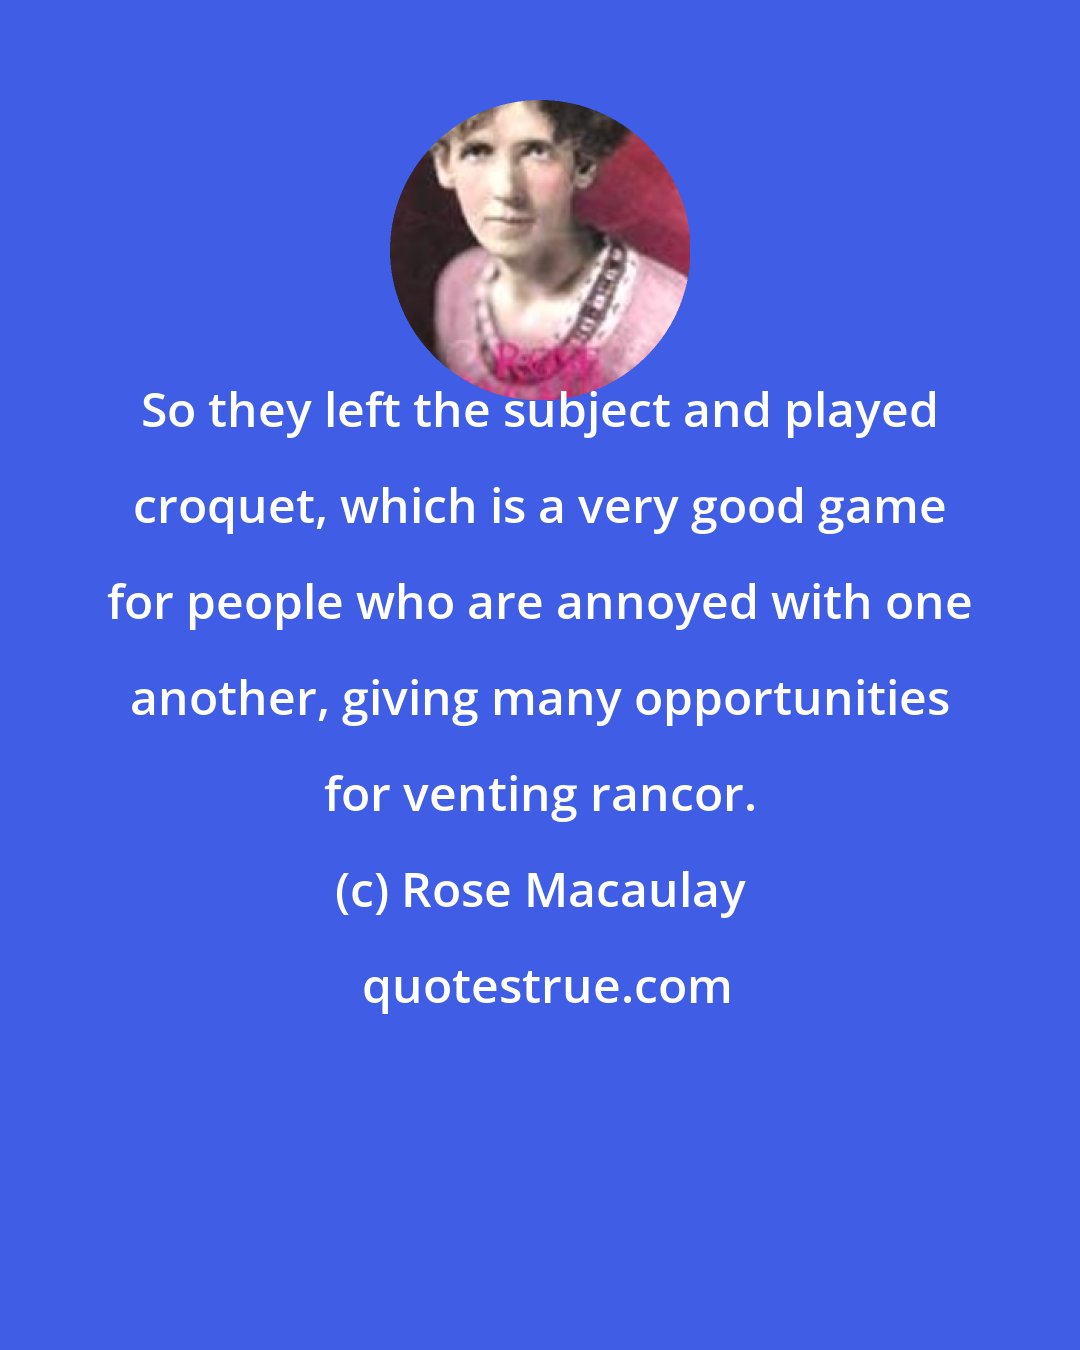 Rose Macaulay: So they left the subject and played croquet, which is a very good game for people who are annoyed with one another, giving many opportunities for venting rancor.